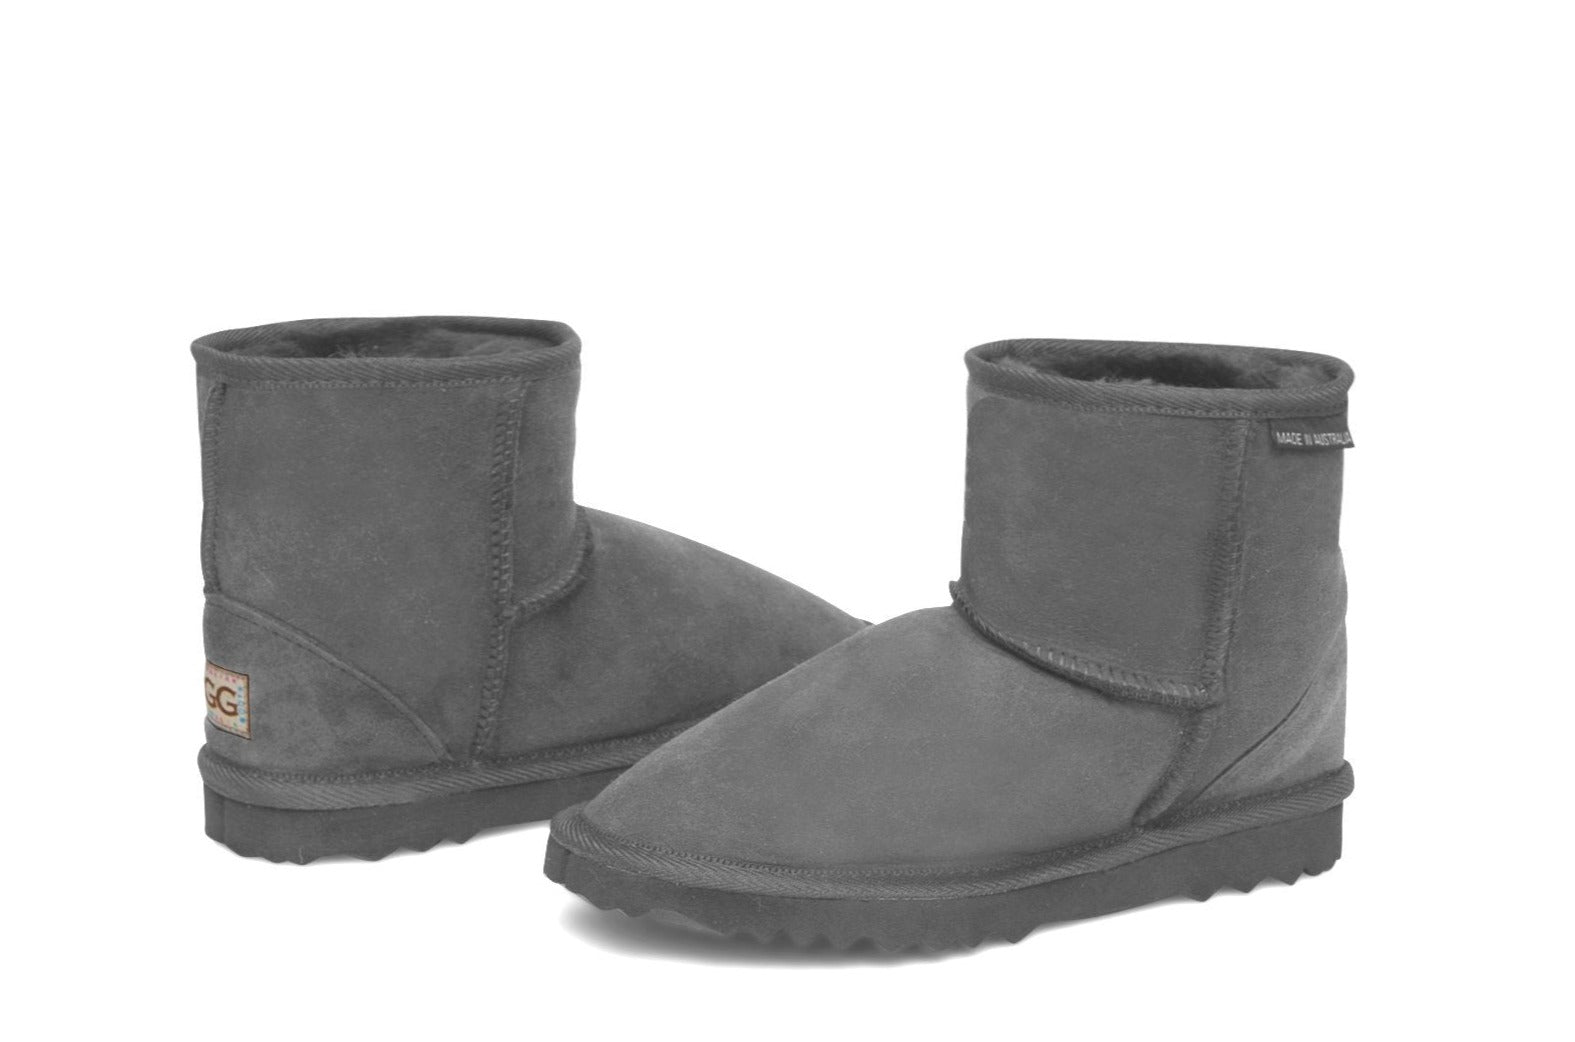 Kid's ultra short boots in grey